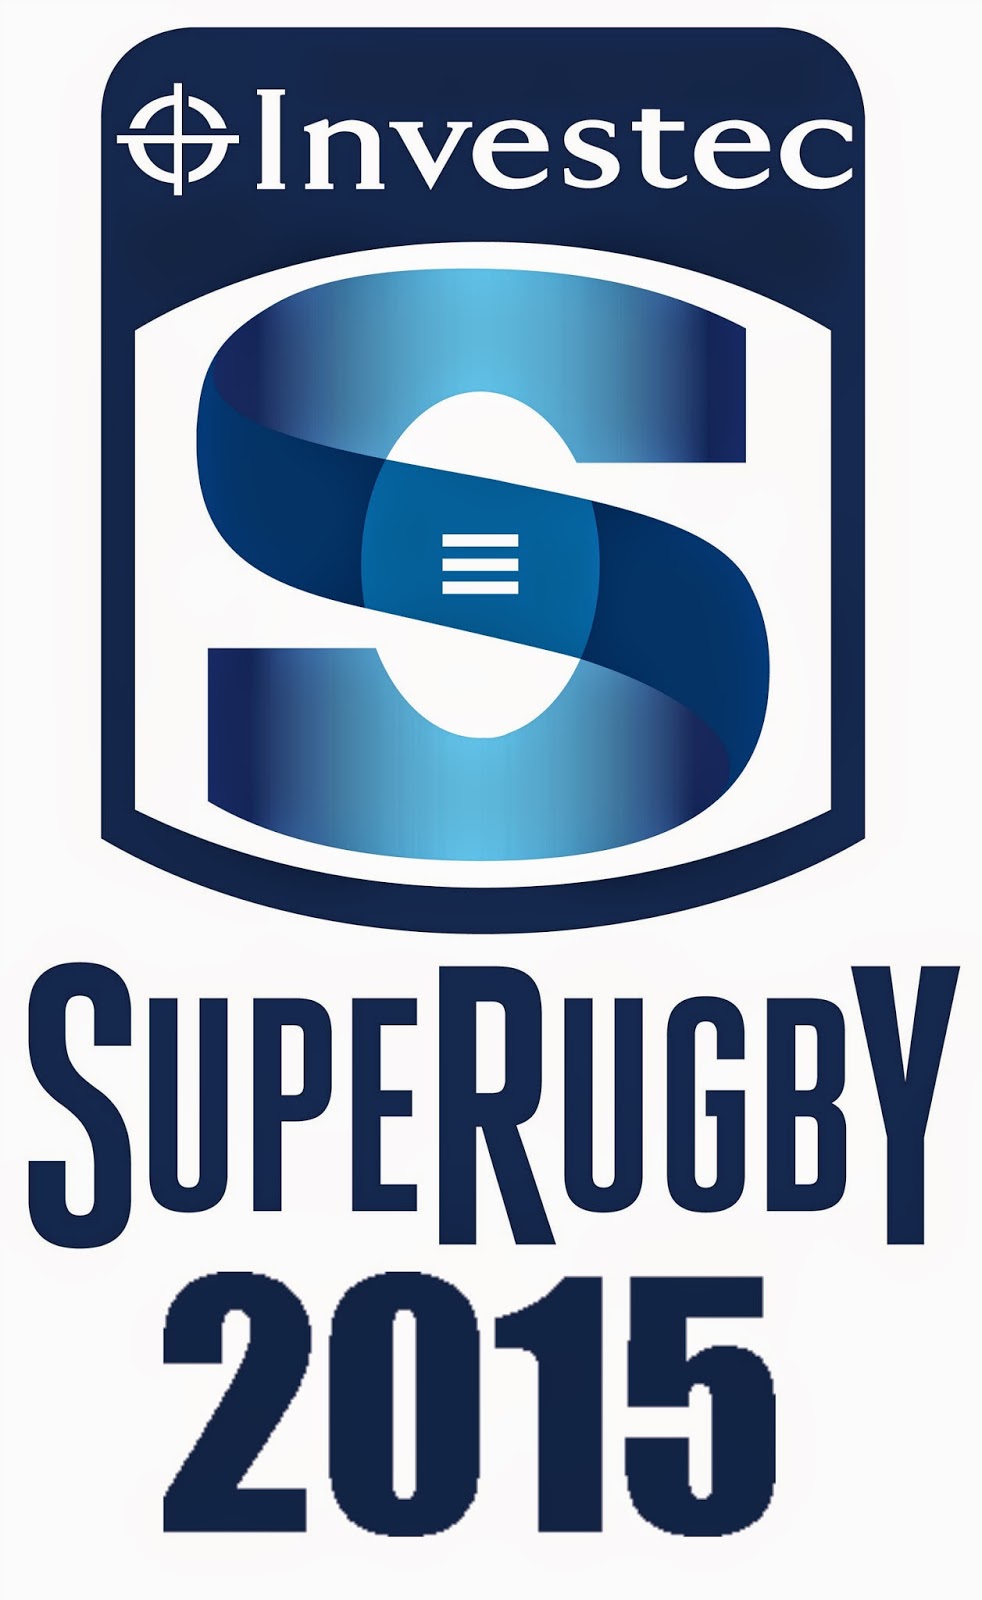 http://gbrugby.blogspot.com/p/2015-investec-super-rugby.html